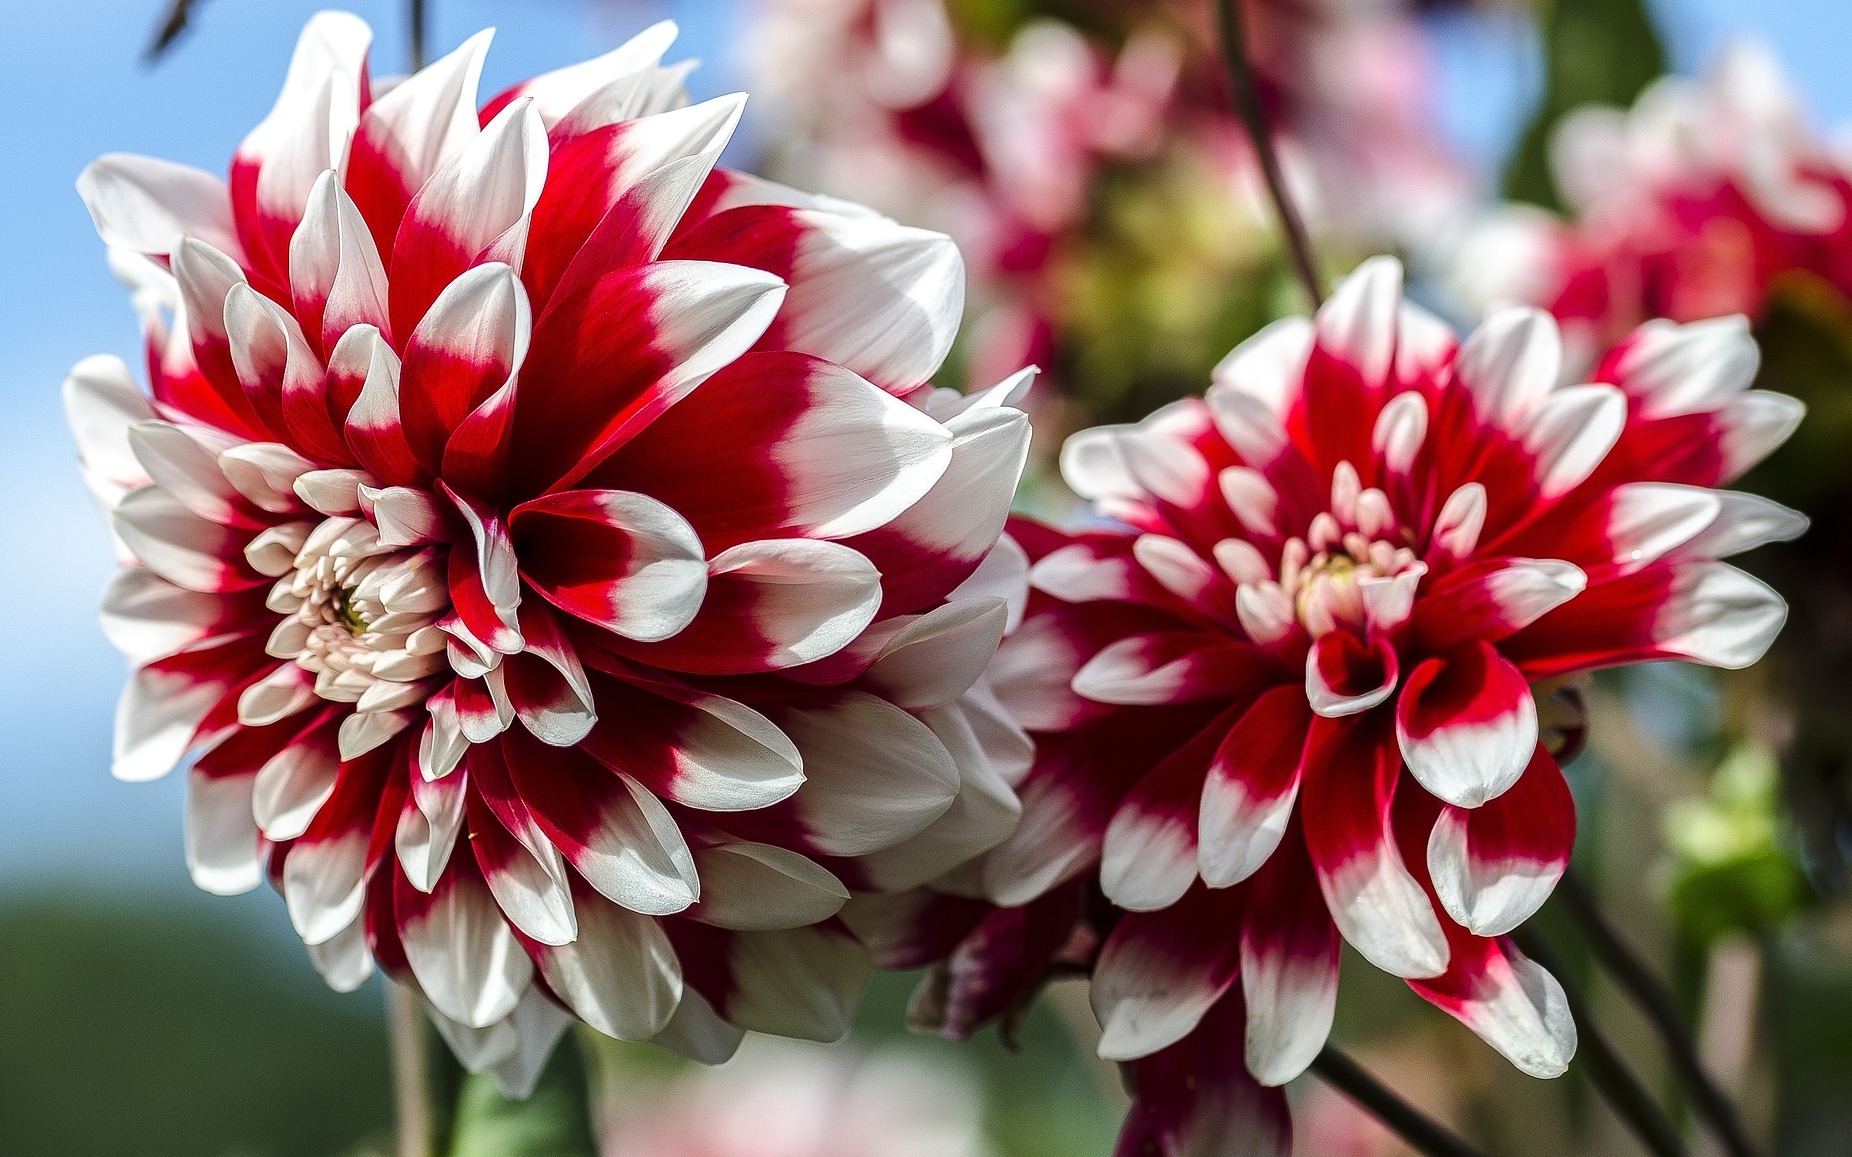 Dahlias: How to Plant, Grow, and Care for Dahlia Flowers | The Old ...